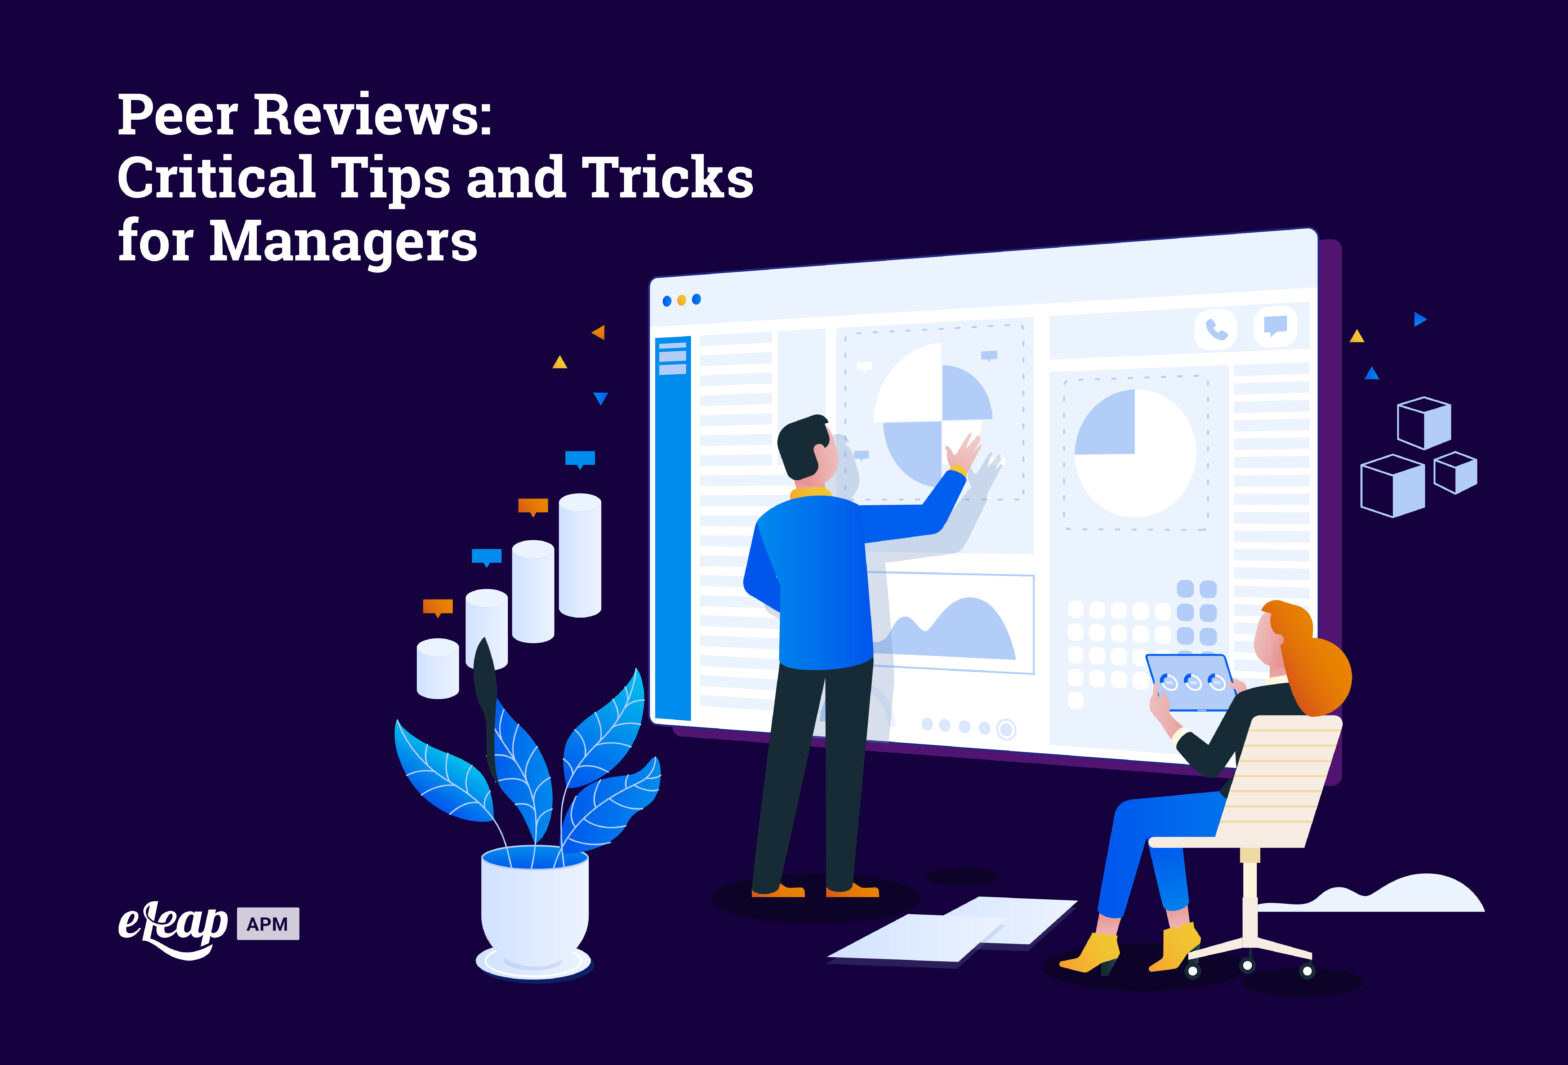 Peer Reviews: Critical Tips and Tricks for Managers